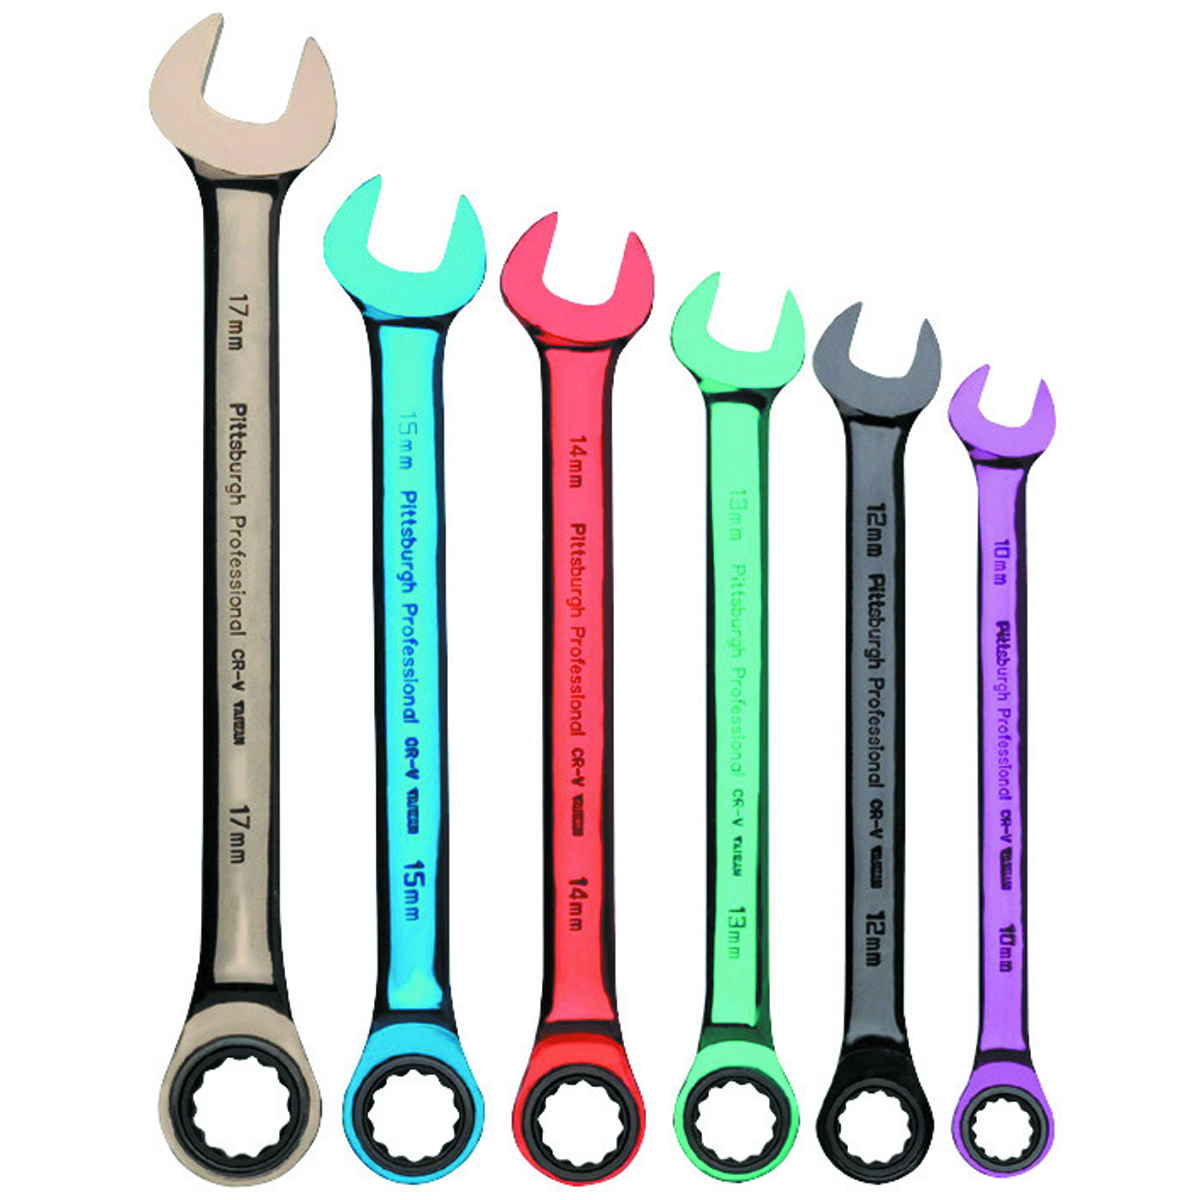 PITTSBURGH Metric Color Combination Ratcheting Wrench Set 6 Pc. - Item 66054 / 61409